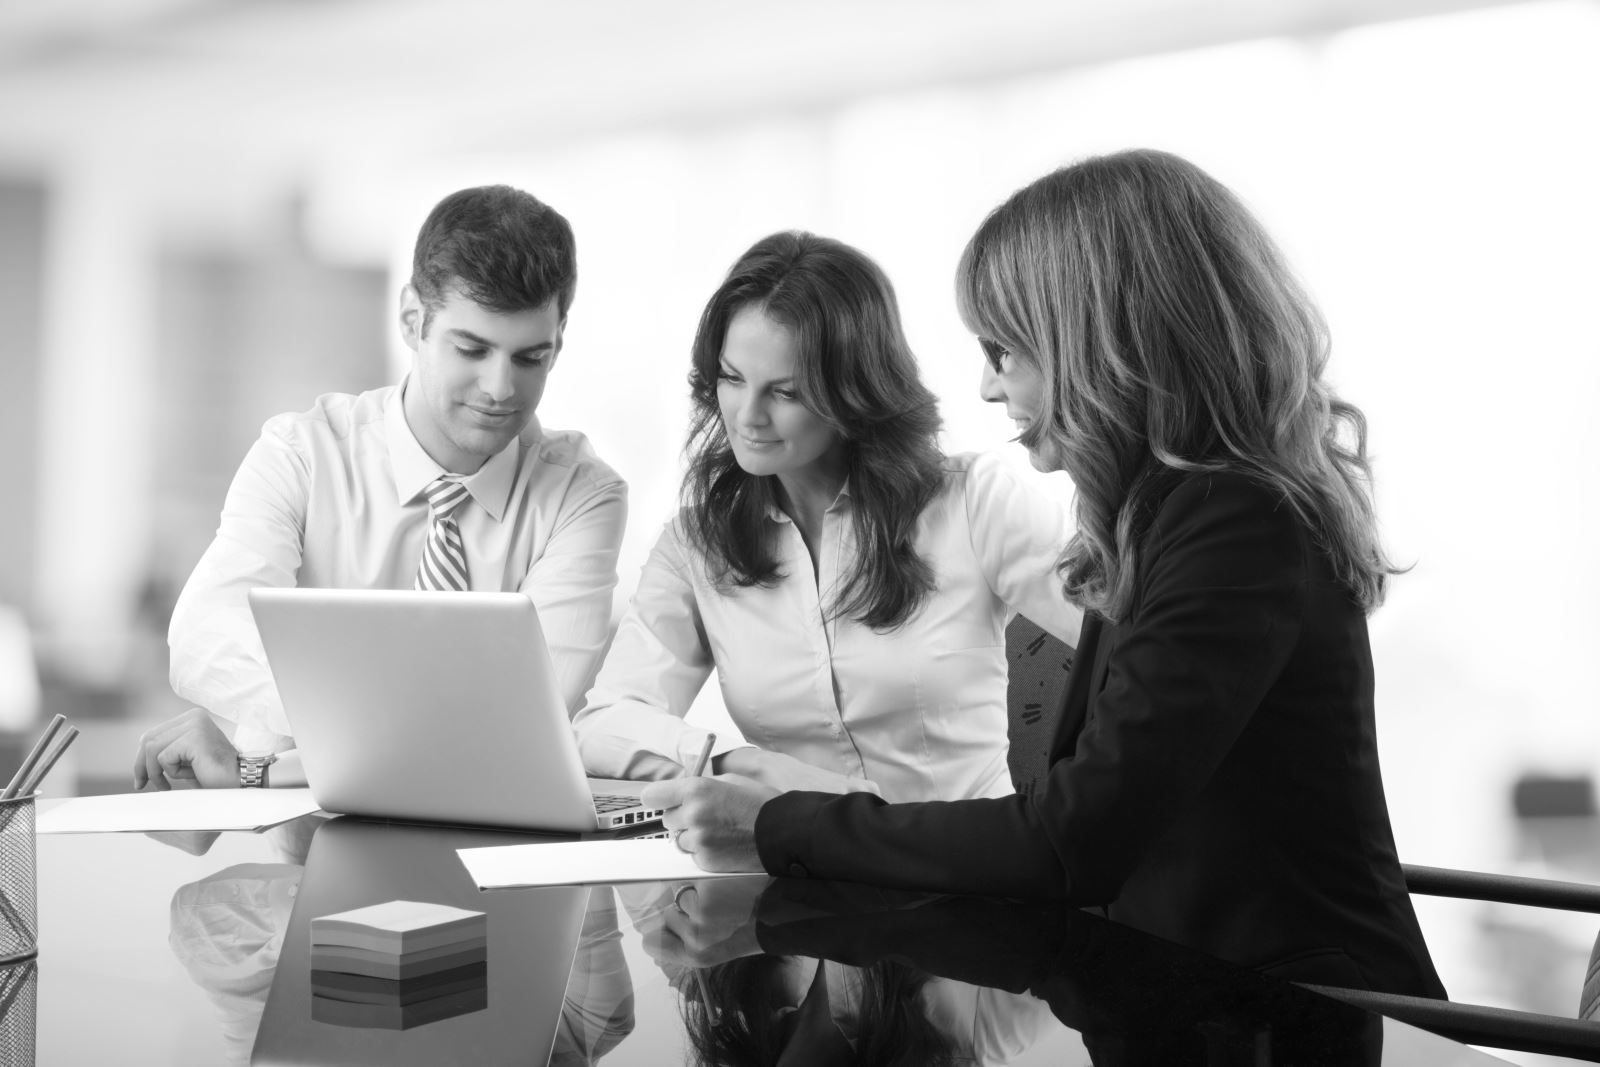 Black and white image of two business women and a business man looking at a laptop